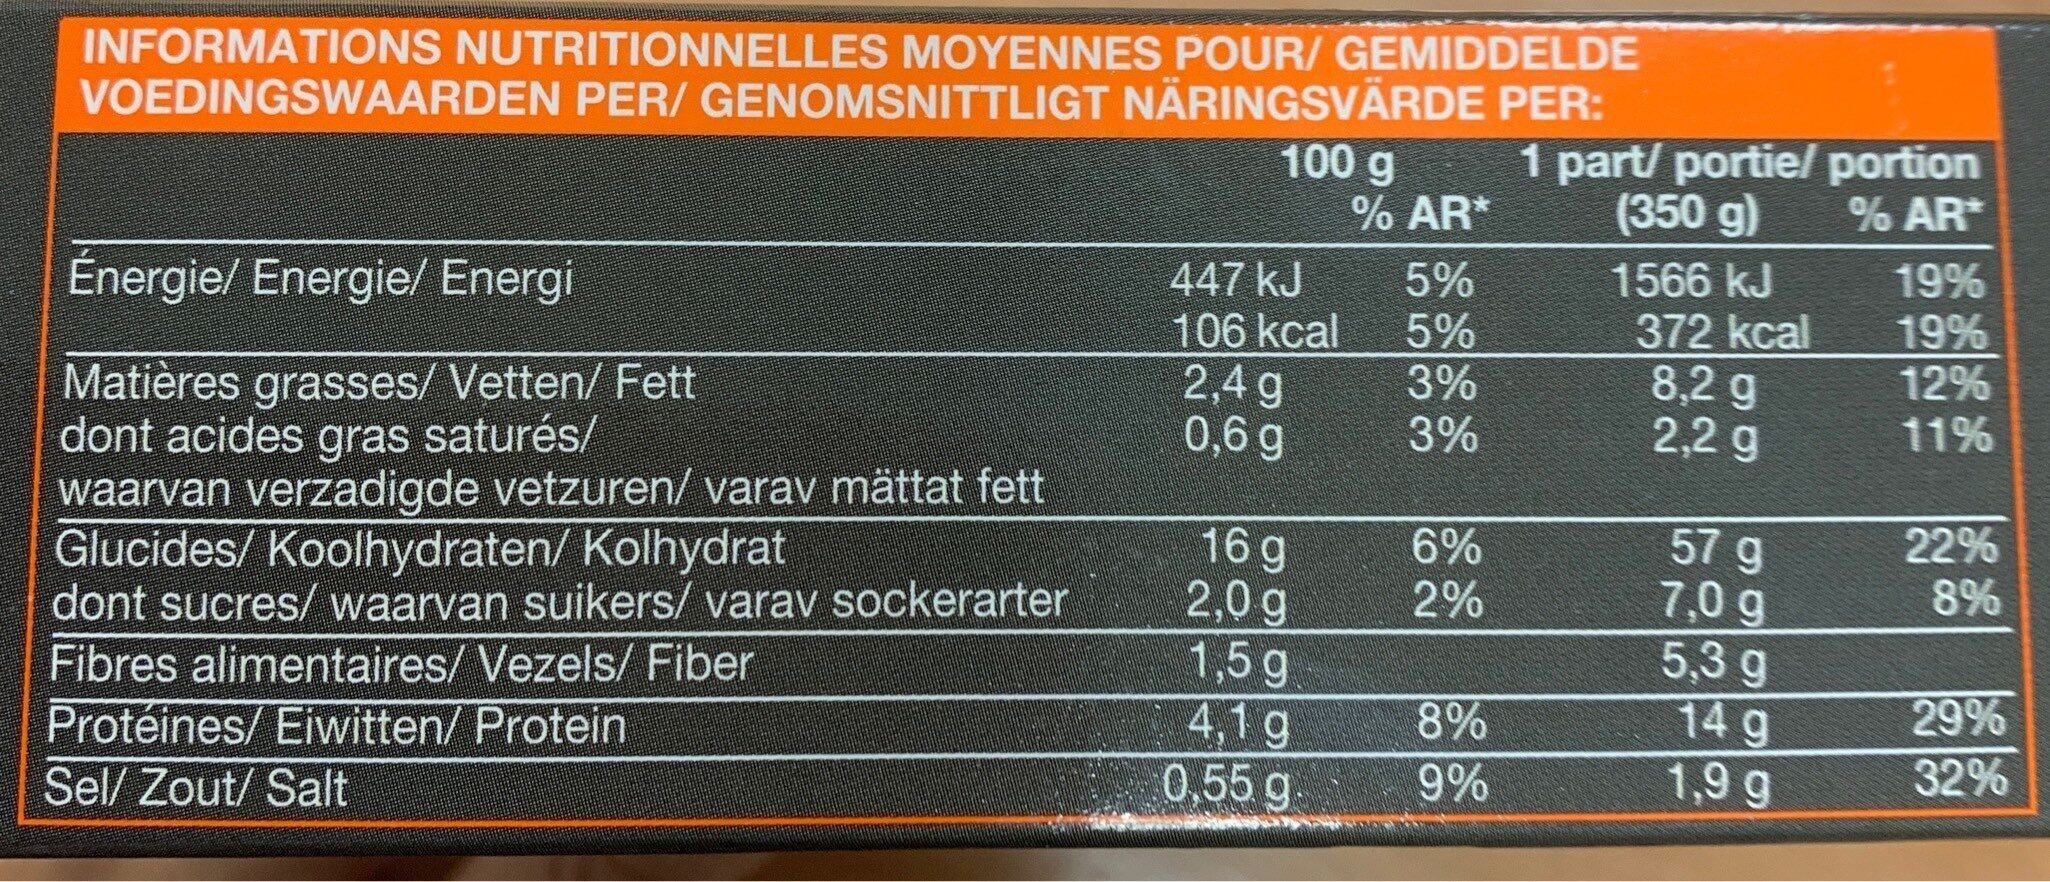 Petits farcis - Nutrition facts - fr